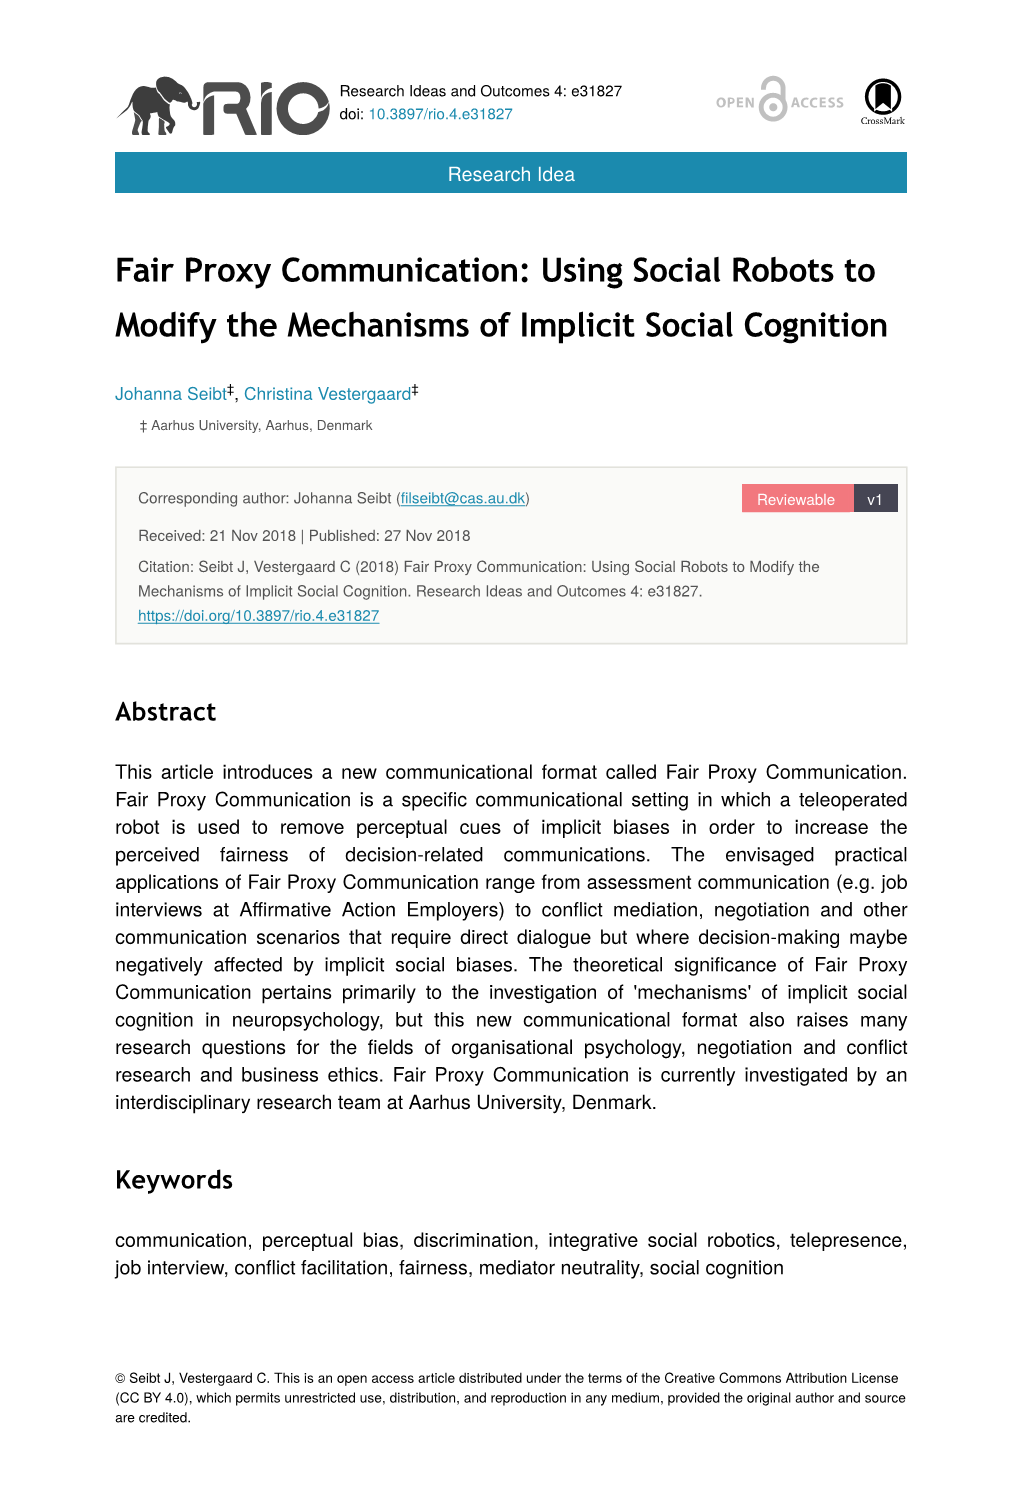 Using Social Robots to Modify the Mechanisms of Implicit Social Cognition